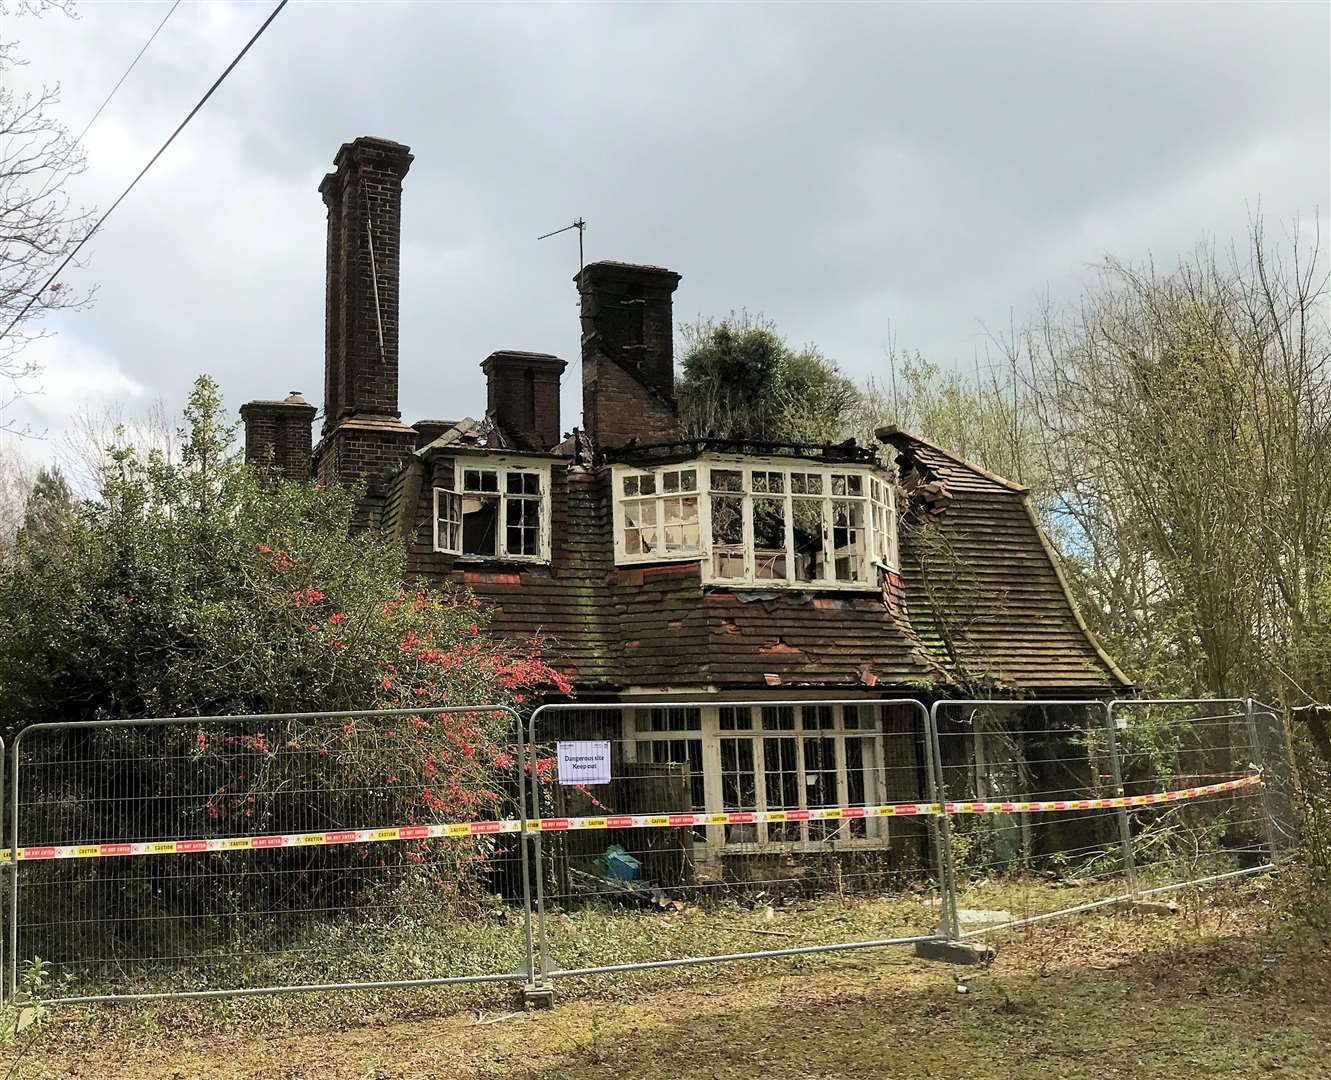 Officers returned to the scene the next morning to carry on investigating the source of the fire